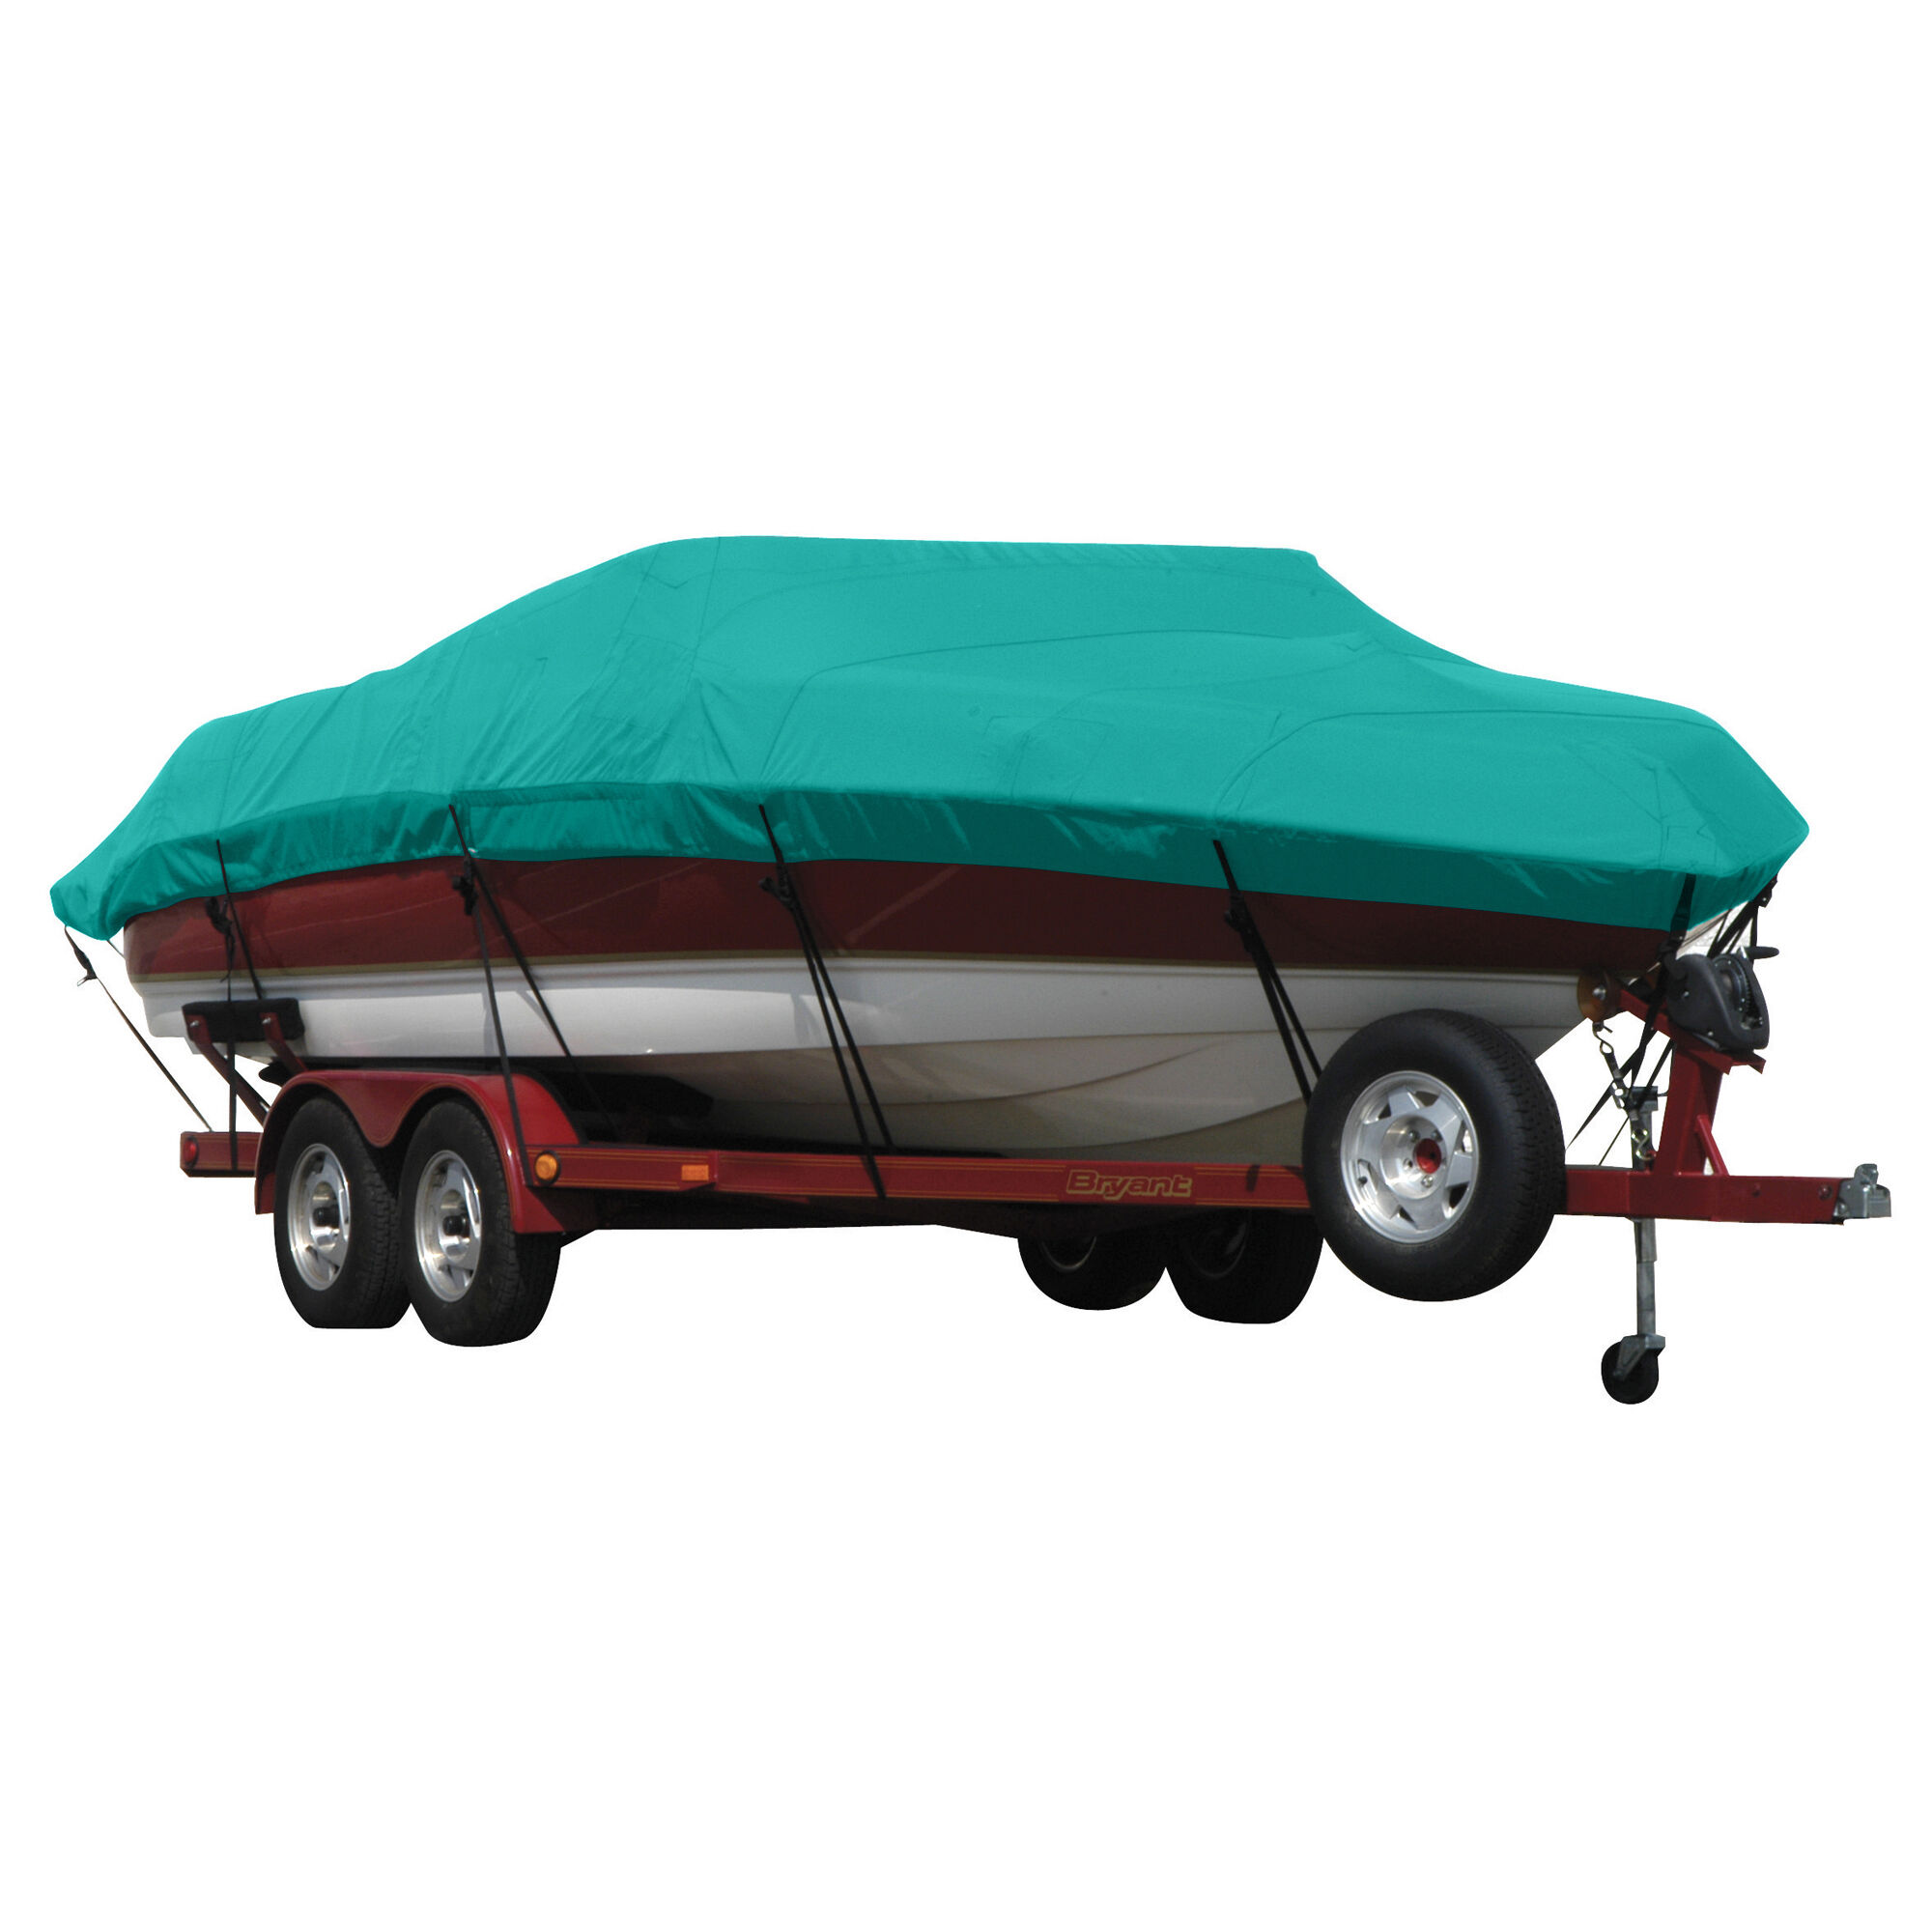 Covermate Exact Fit Sunbrella Boat Cover for Glastron Gt 225 Gt 225 Bowrider w/ Low Profile Windshield Covers Extended Swim PLATFORMm I/O.